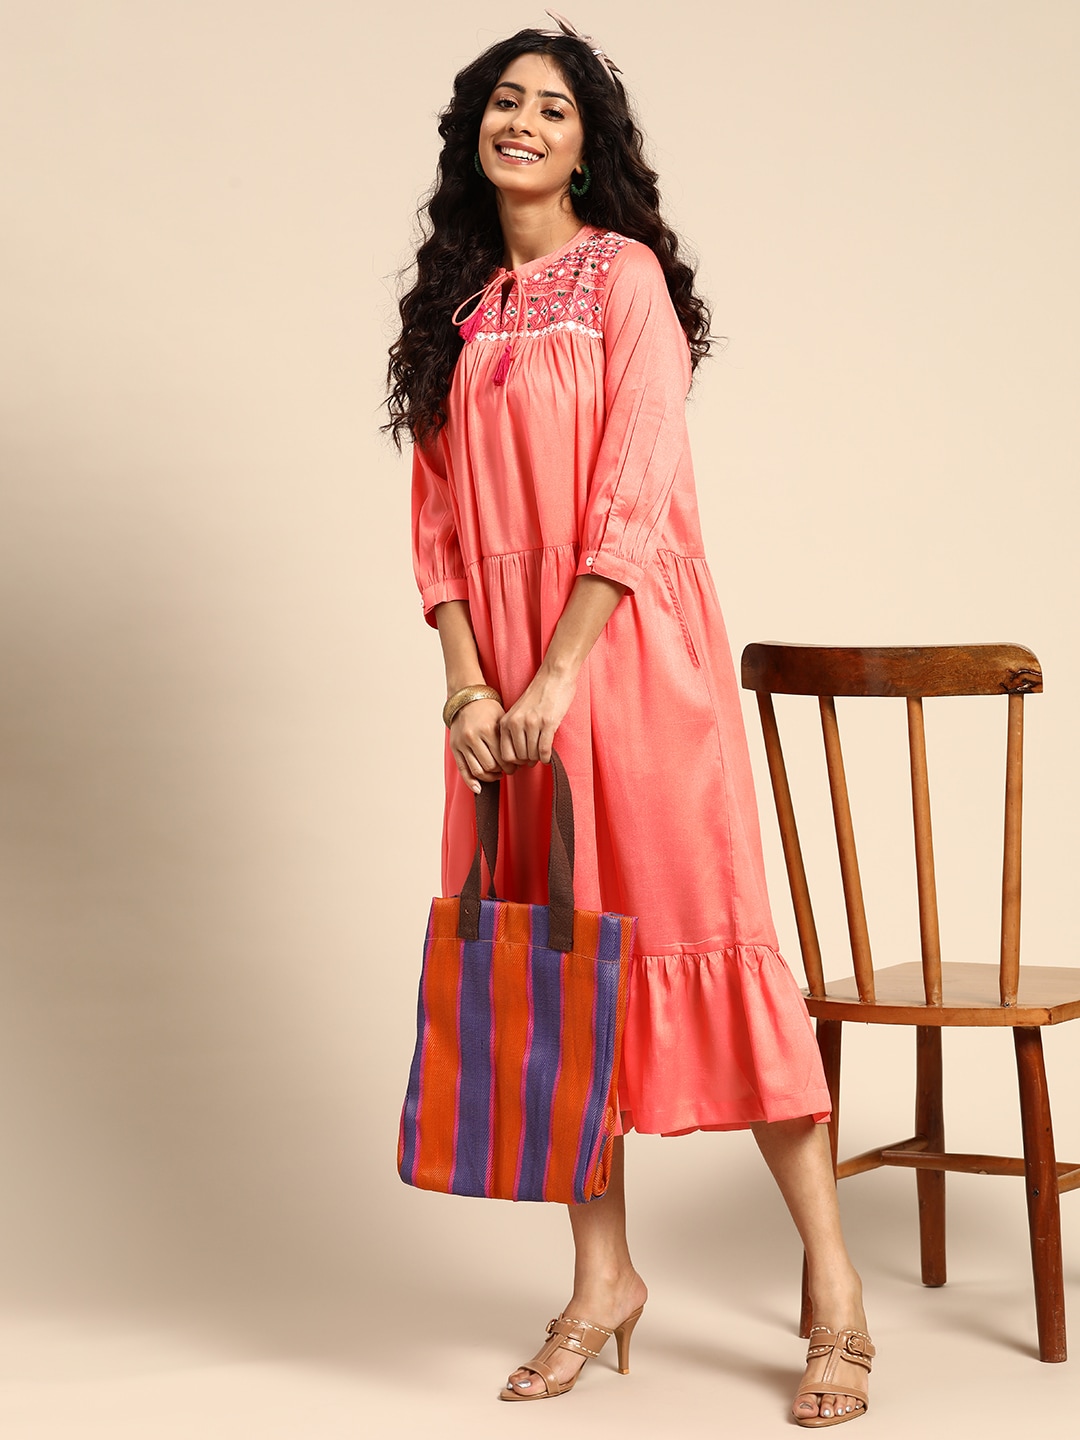 Sangria Peach-Coloured Ethnic Motifs Embroidered A-Line Midi Dress Price in India